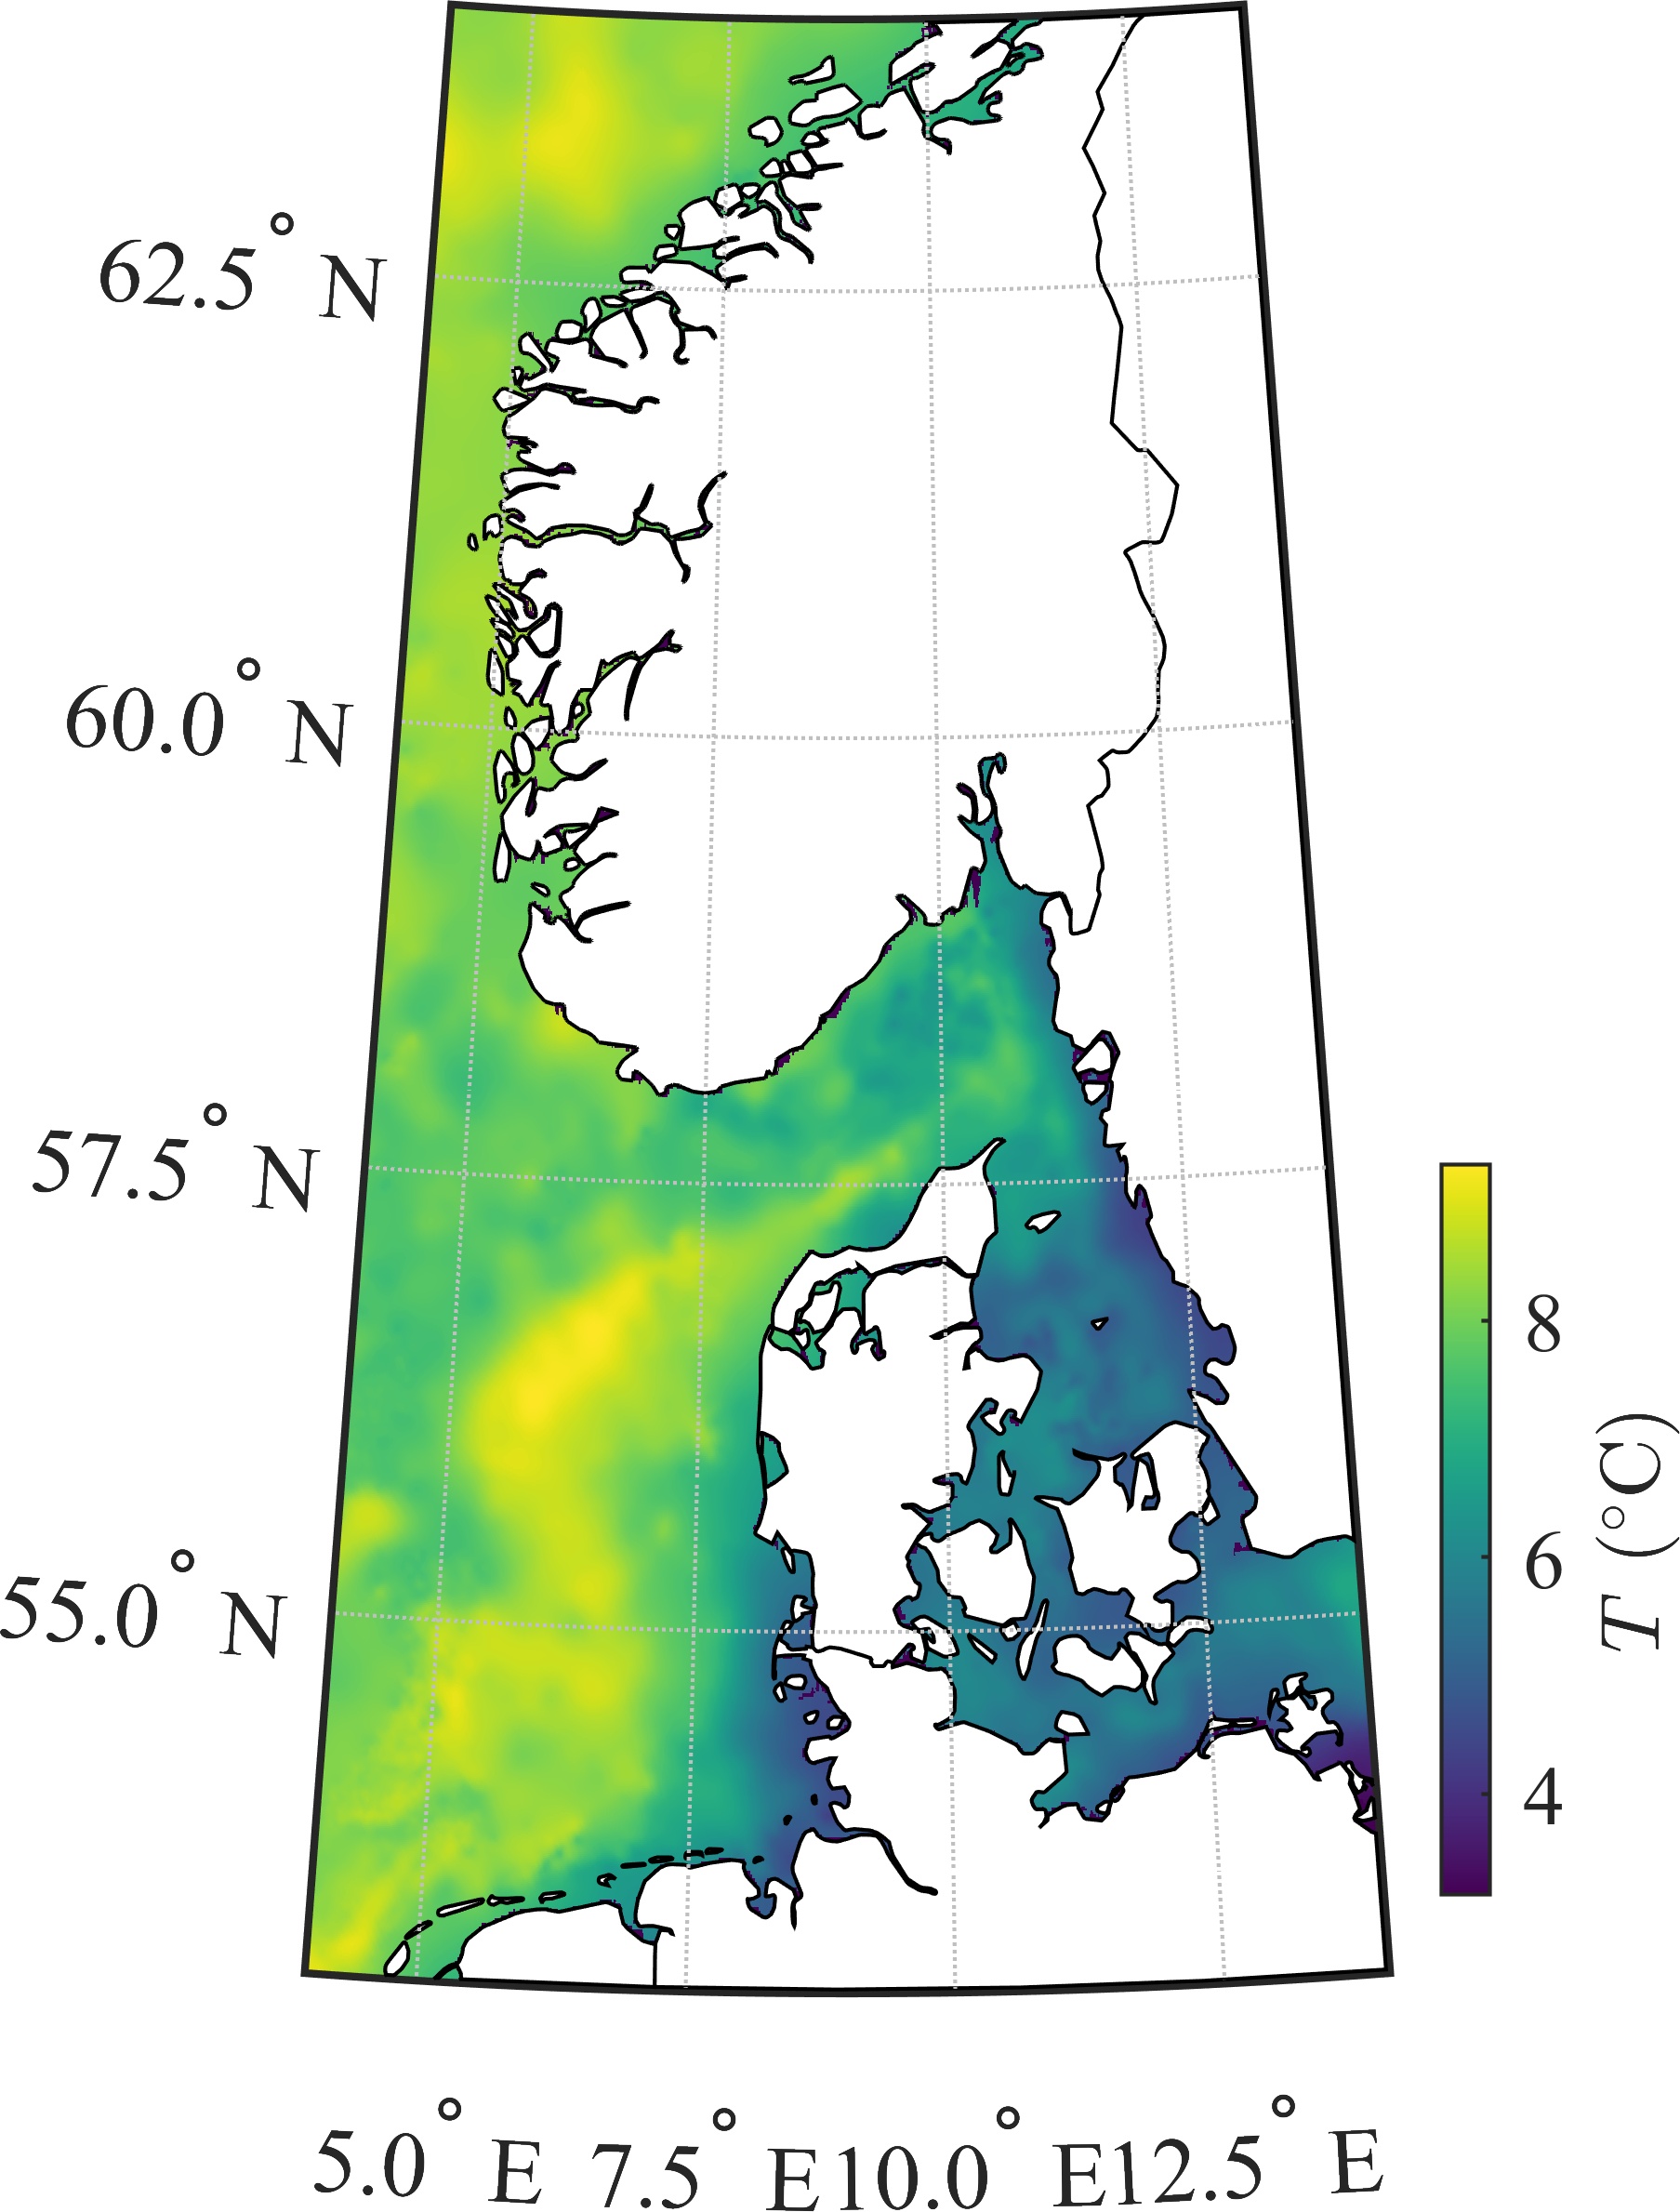 SST map of the North Sea